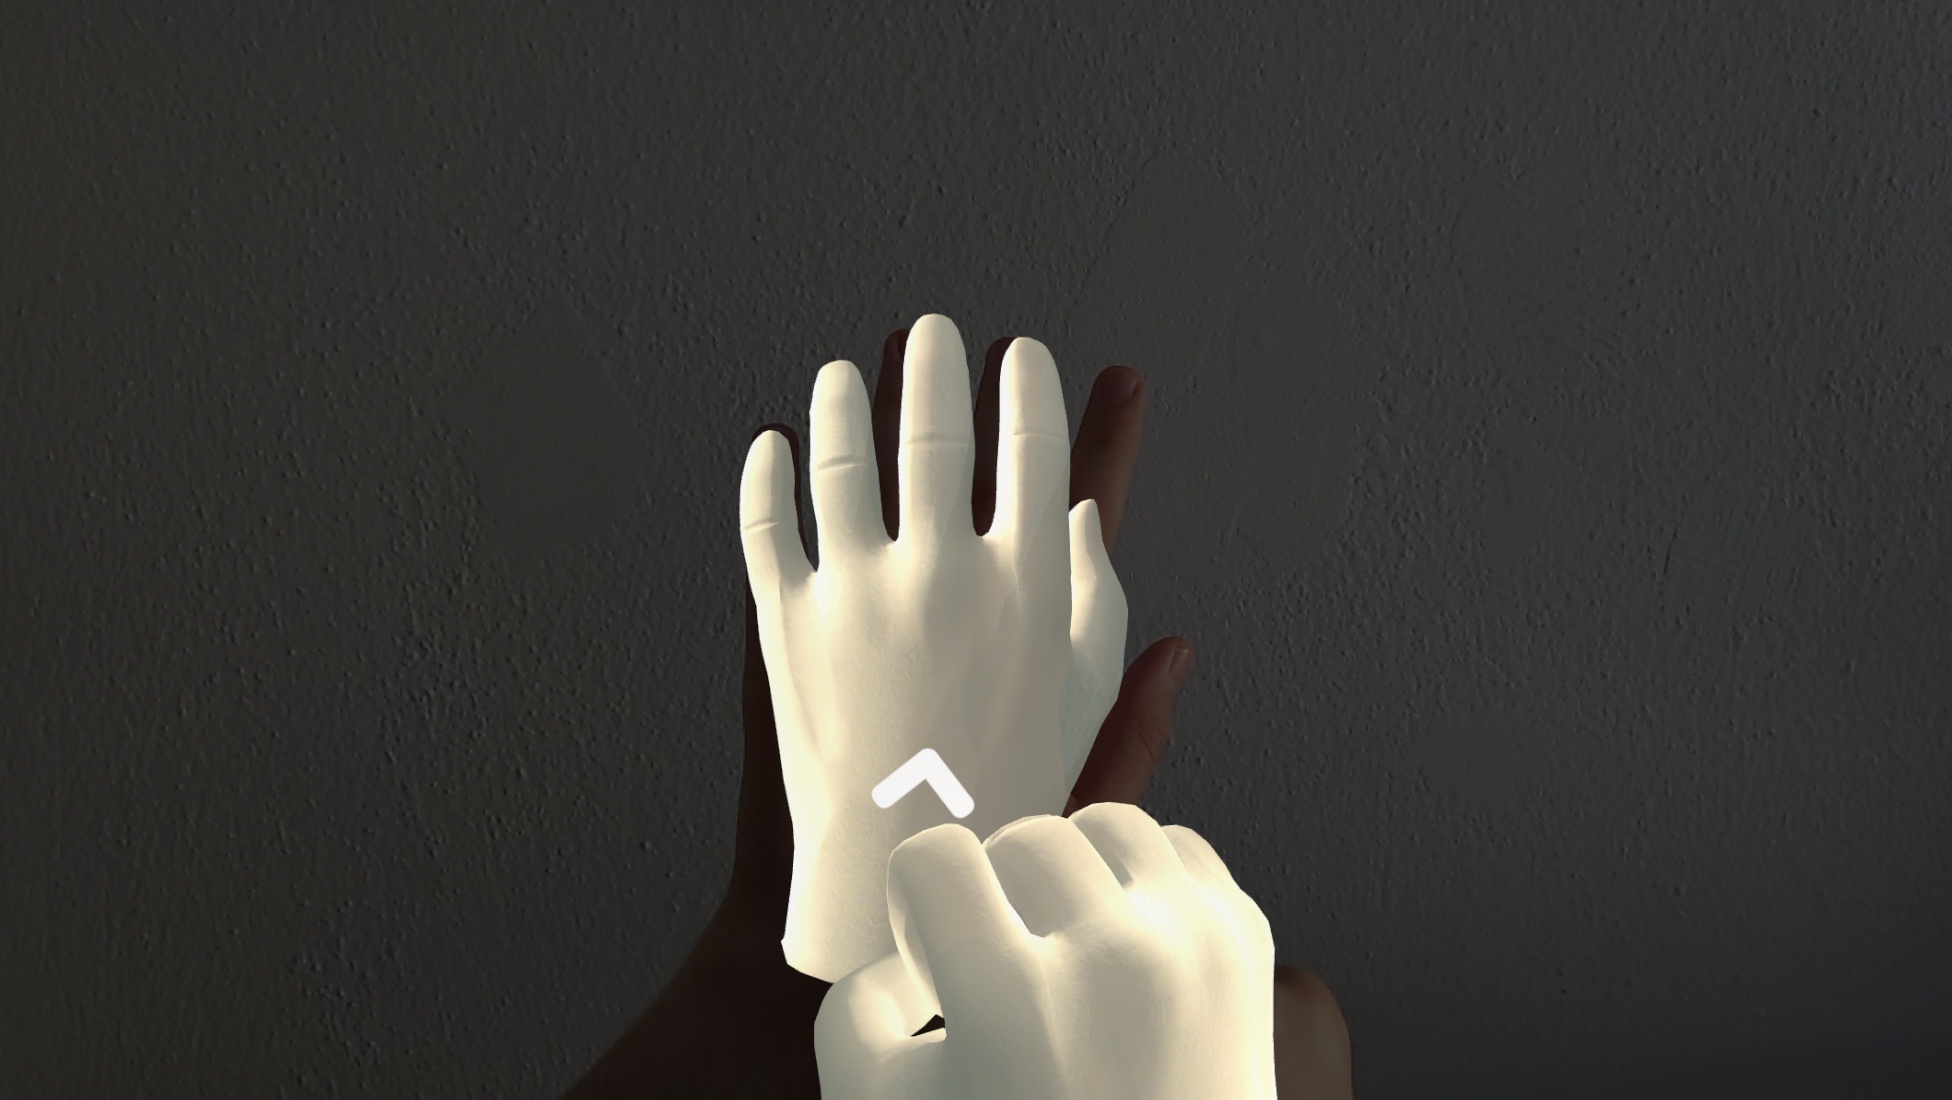 Suggested AR Hand position for movement